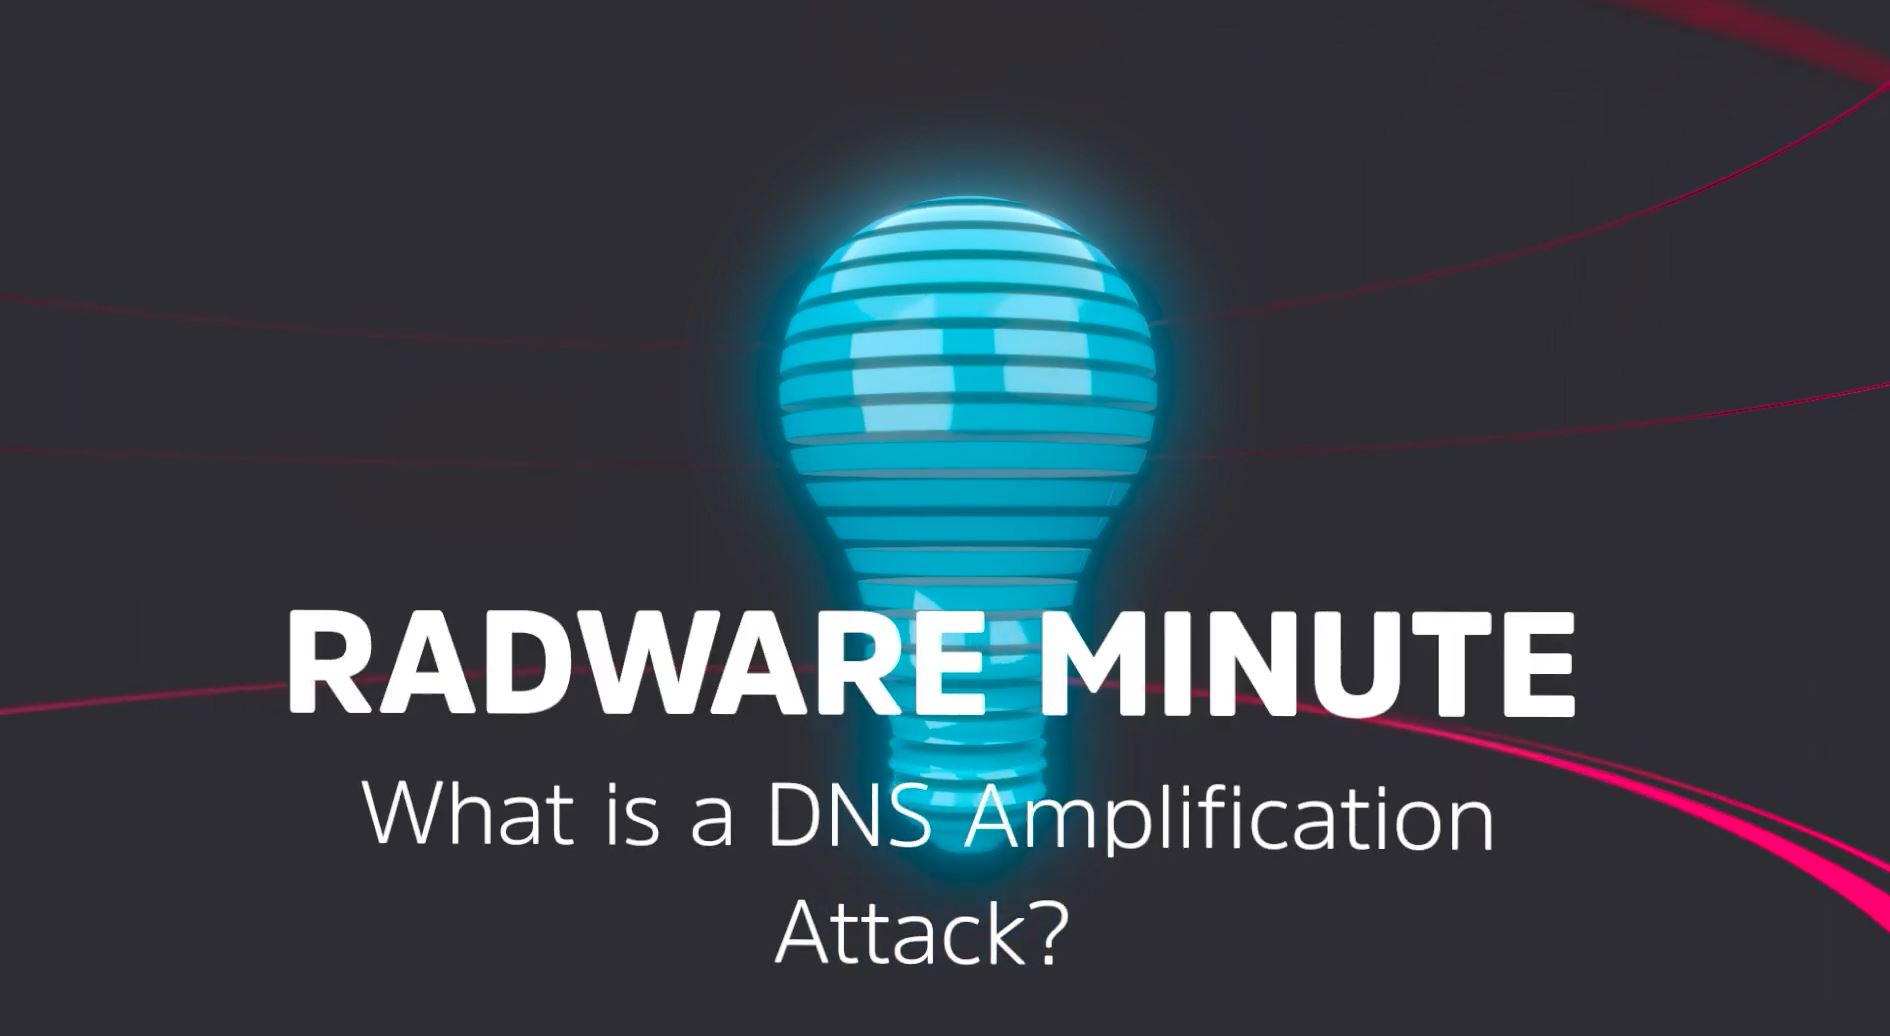 What is DNS Amplification Attack?